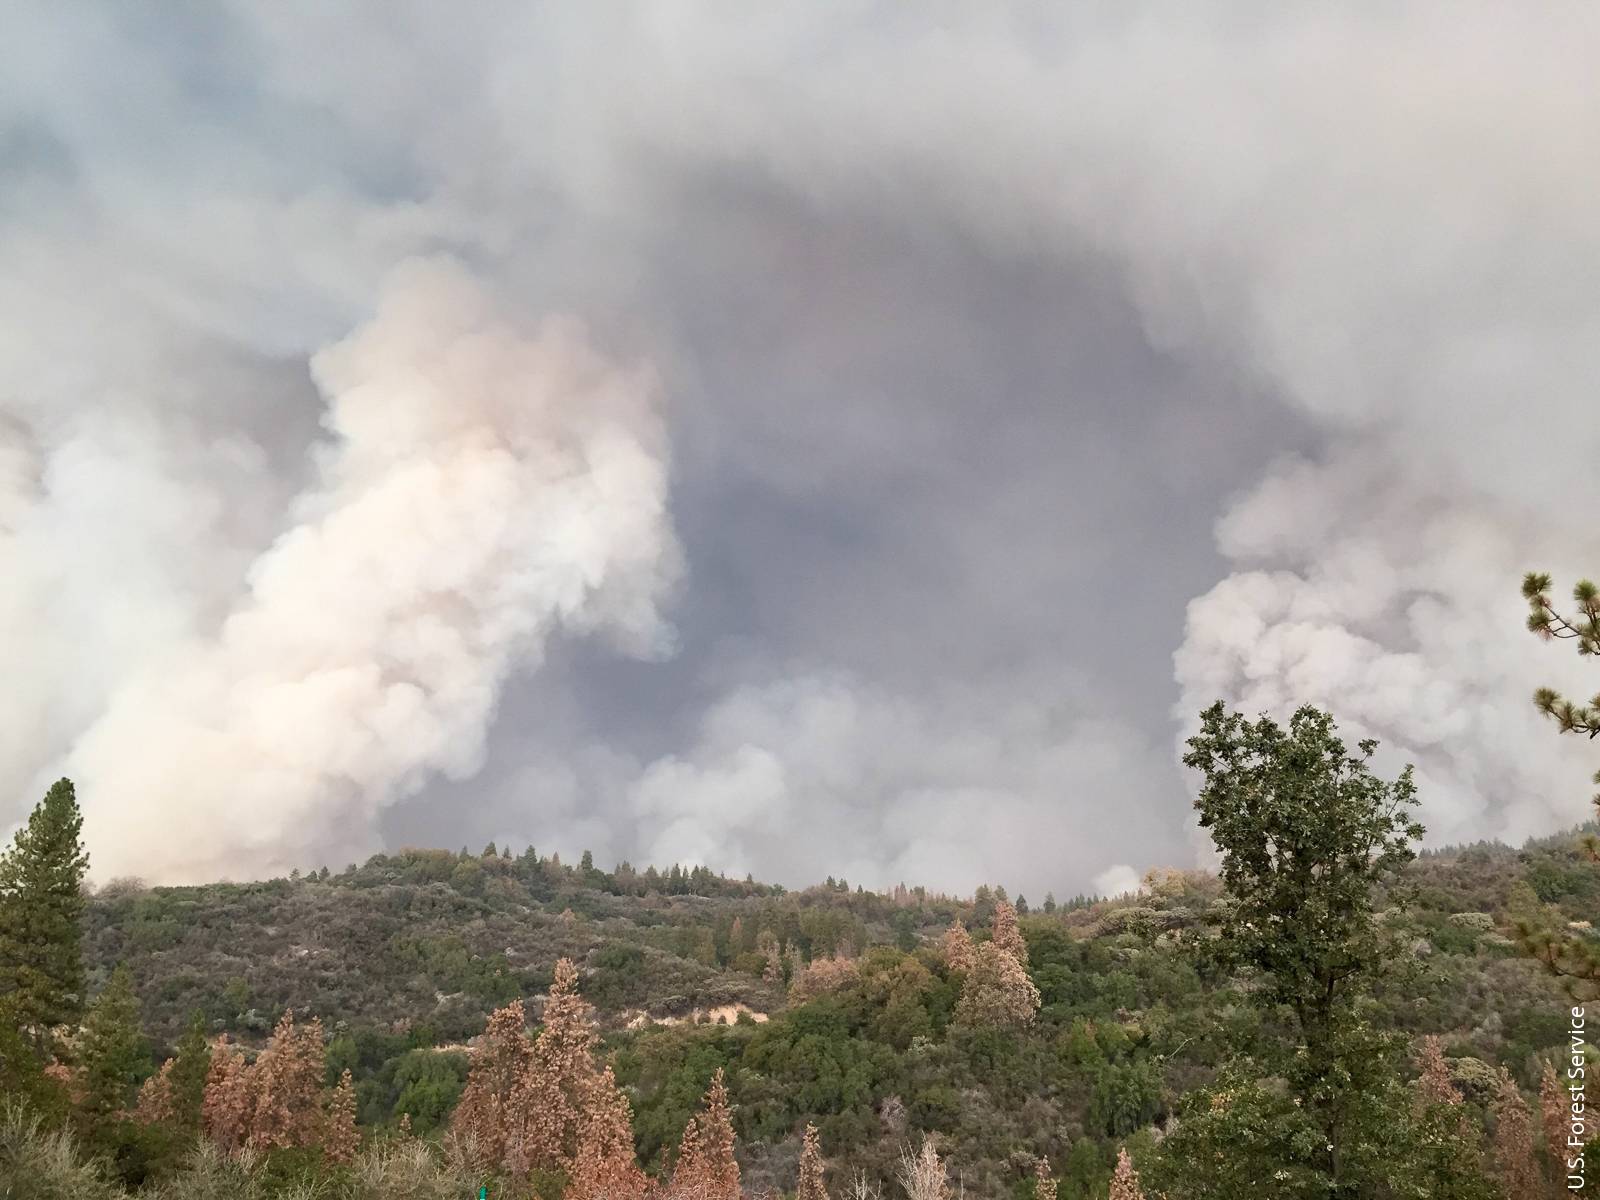 The death of more than 100 million trees from drought and bark beetle damage in the Sierra Nevada has led to concerns about the large amount of combustible material and the potential for mass fires. A team of UC and USDA scientists studied 50 mixed-conifer plots affected by tree mortality that burned in the 2015 Rough Fire, a wildfire in the Sierra National Forest that consumed an estimated 139,133 acres. The results suggest that fire spread increased as prefire tree mortality increased, but only up to prefire mortality levels of 30% of plot trees.